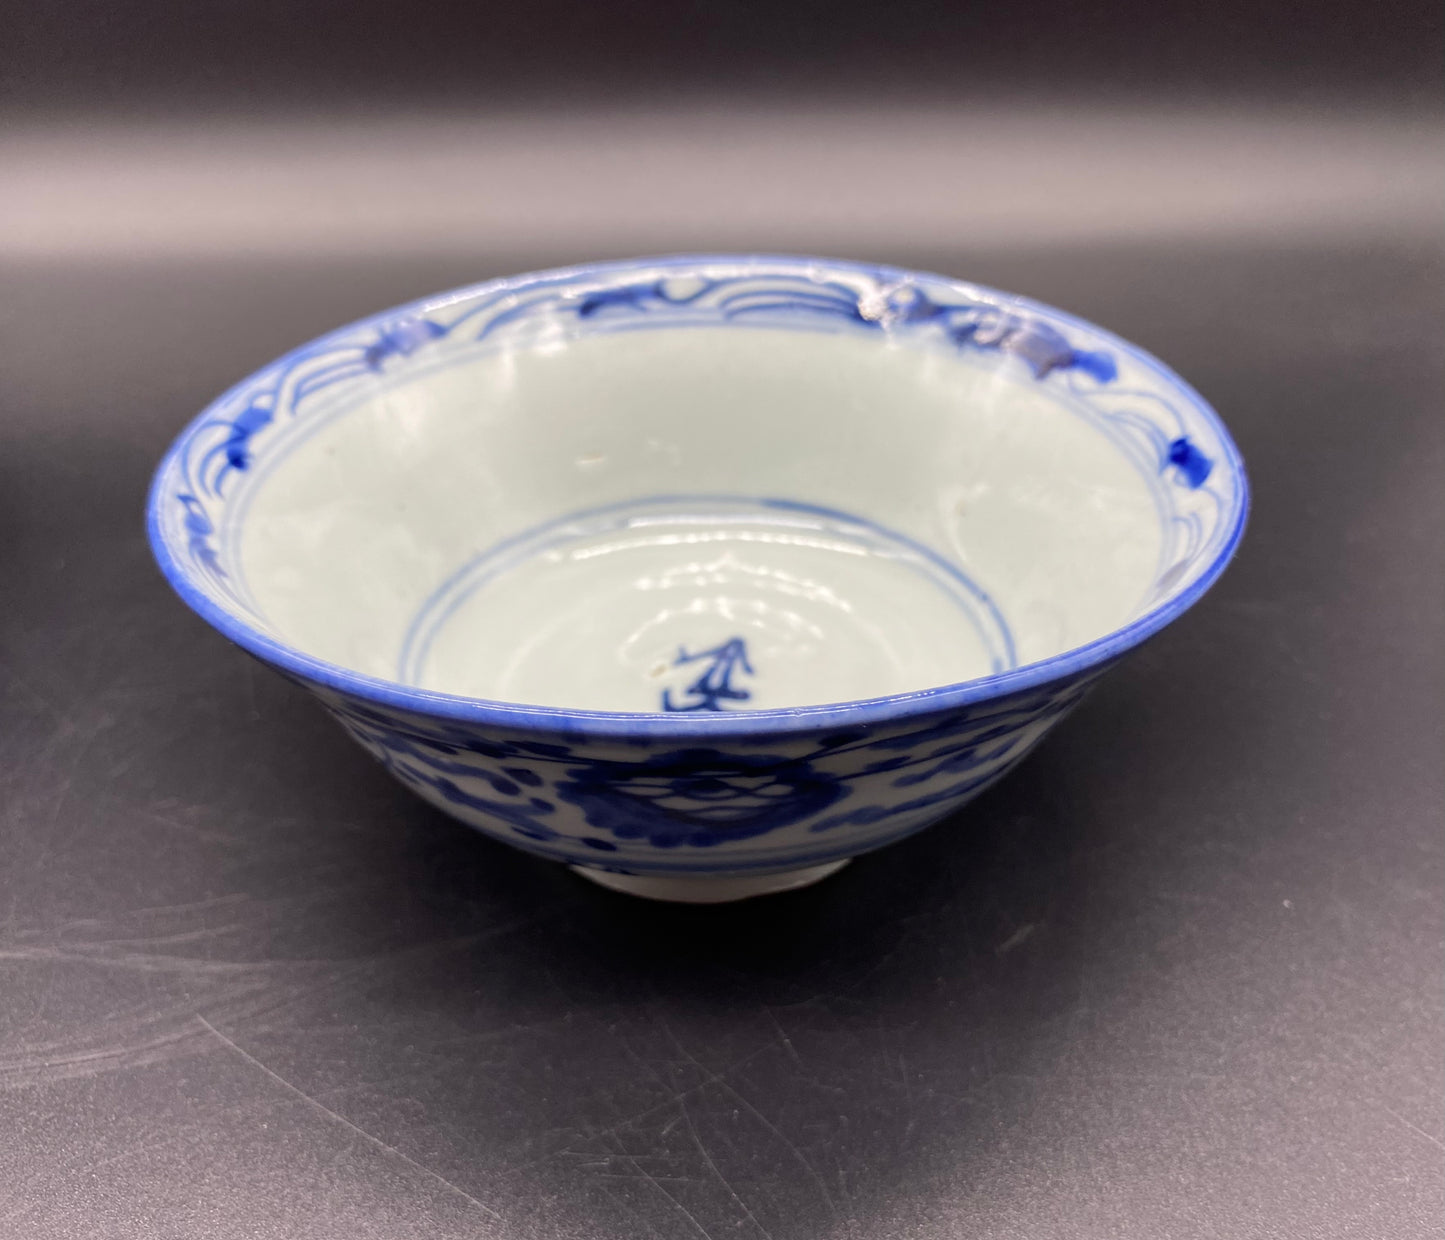 Antiques Store Online - Chinese Provencal Blue & White Qing Porcelain Bowls 18th Century 